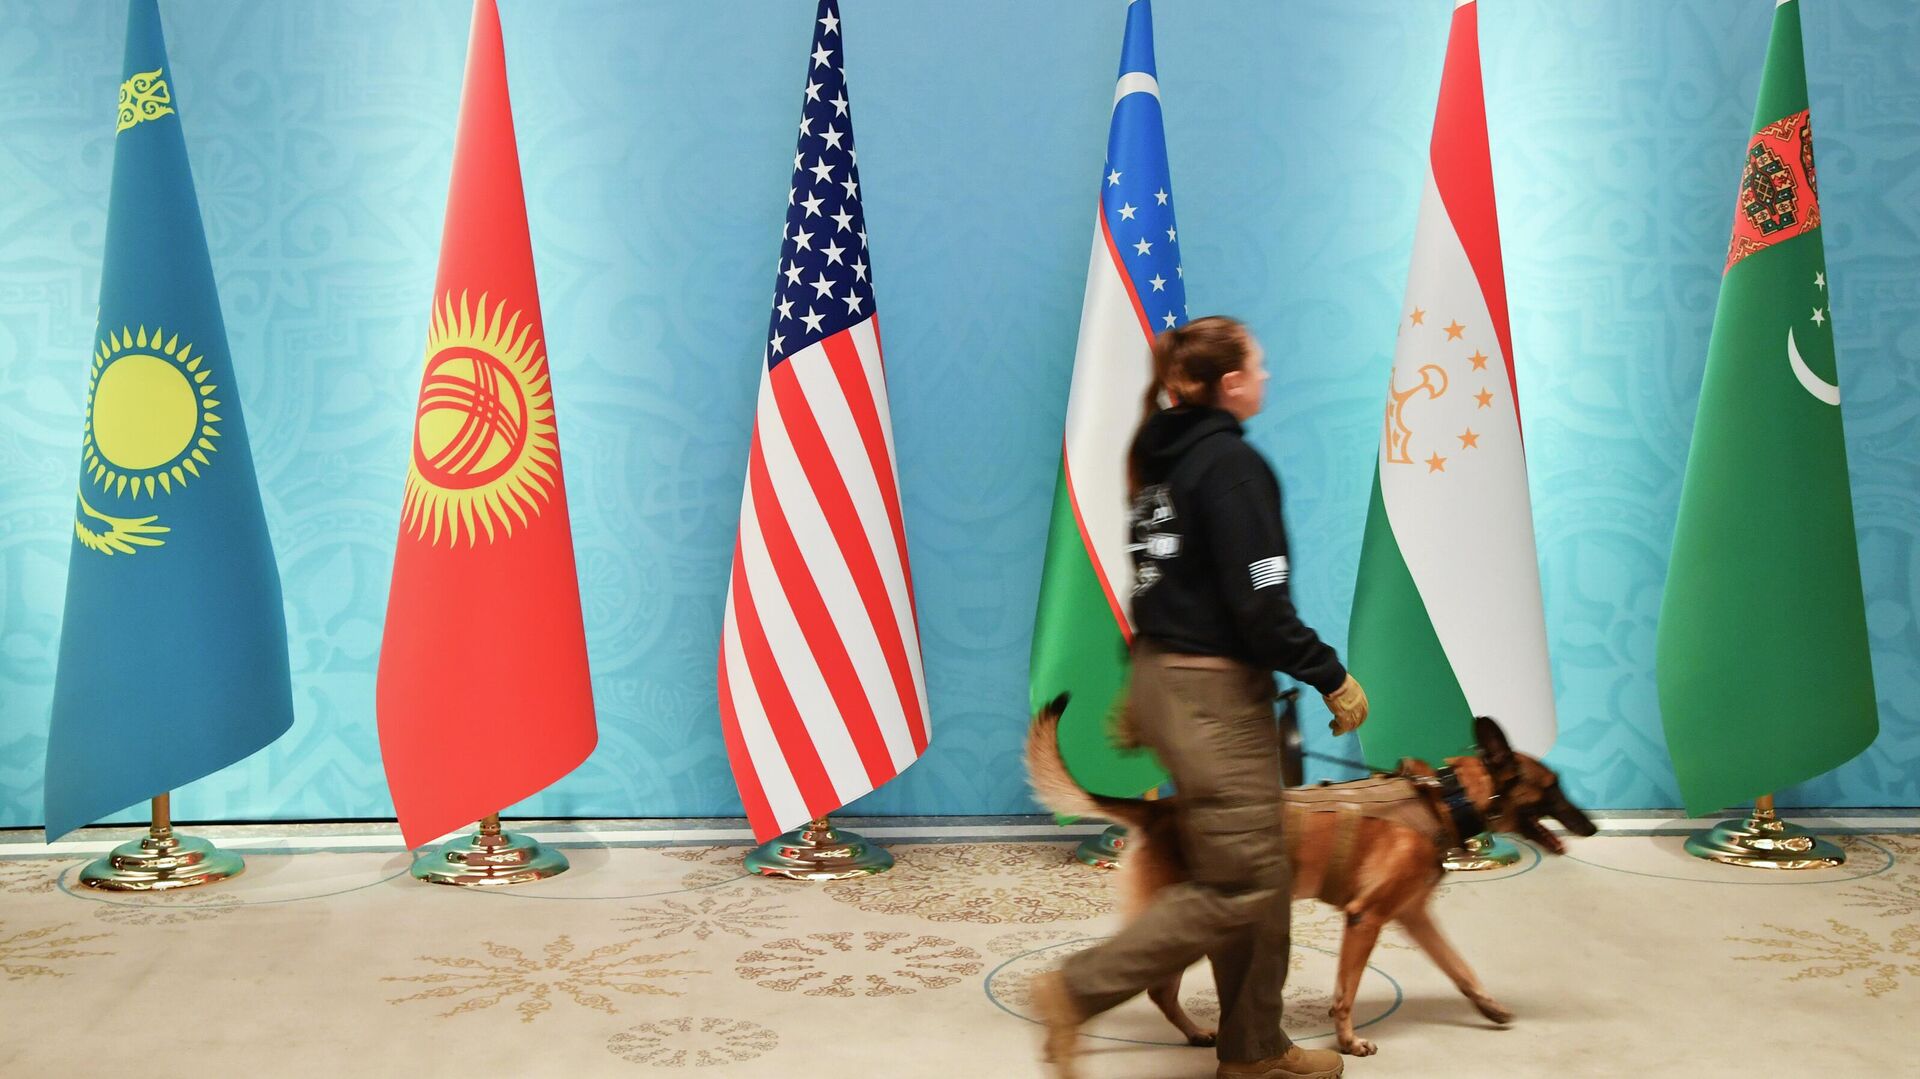 USA and Central Asian countries announce security cooperation